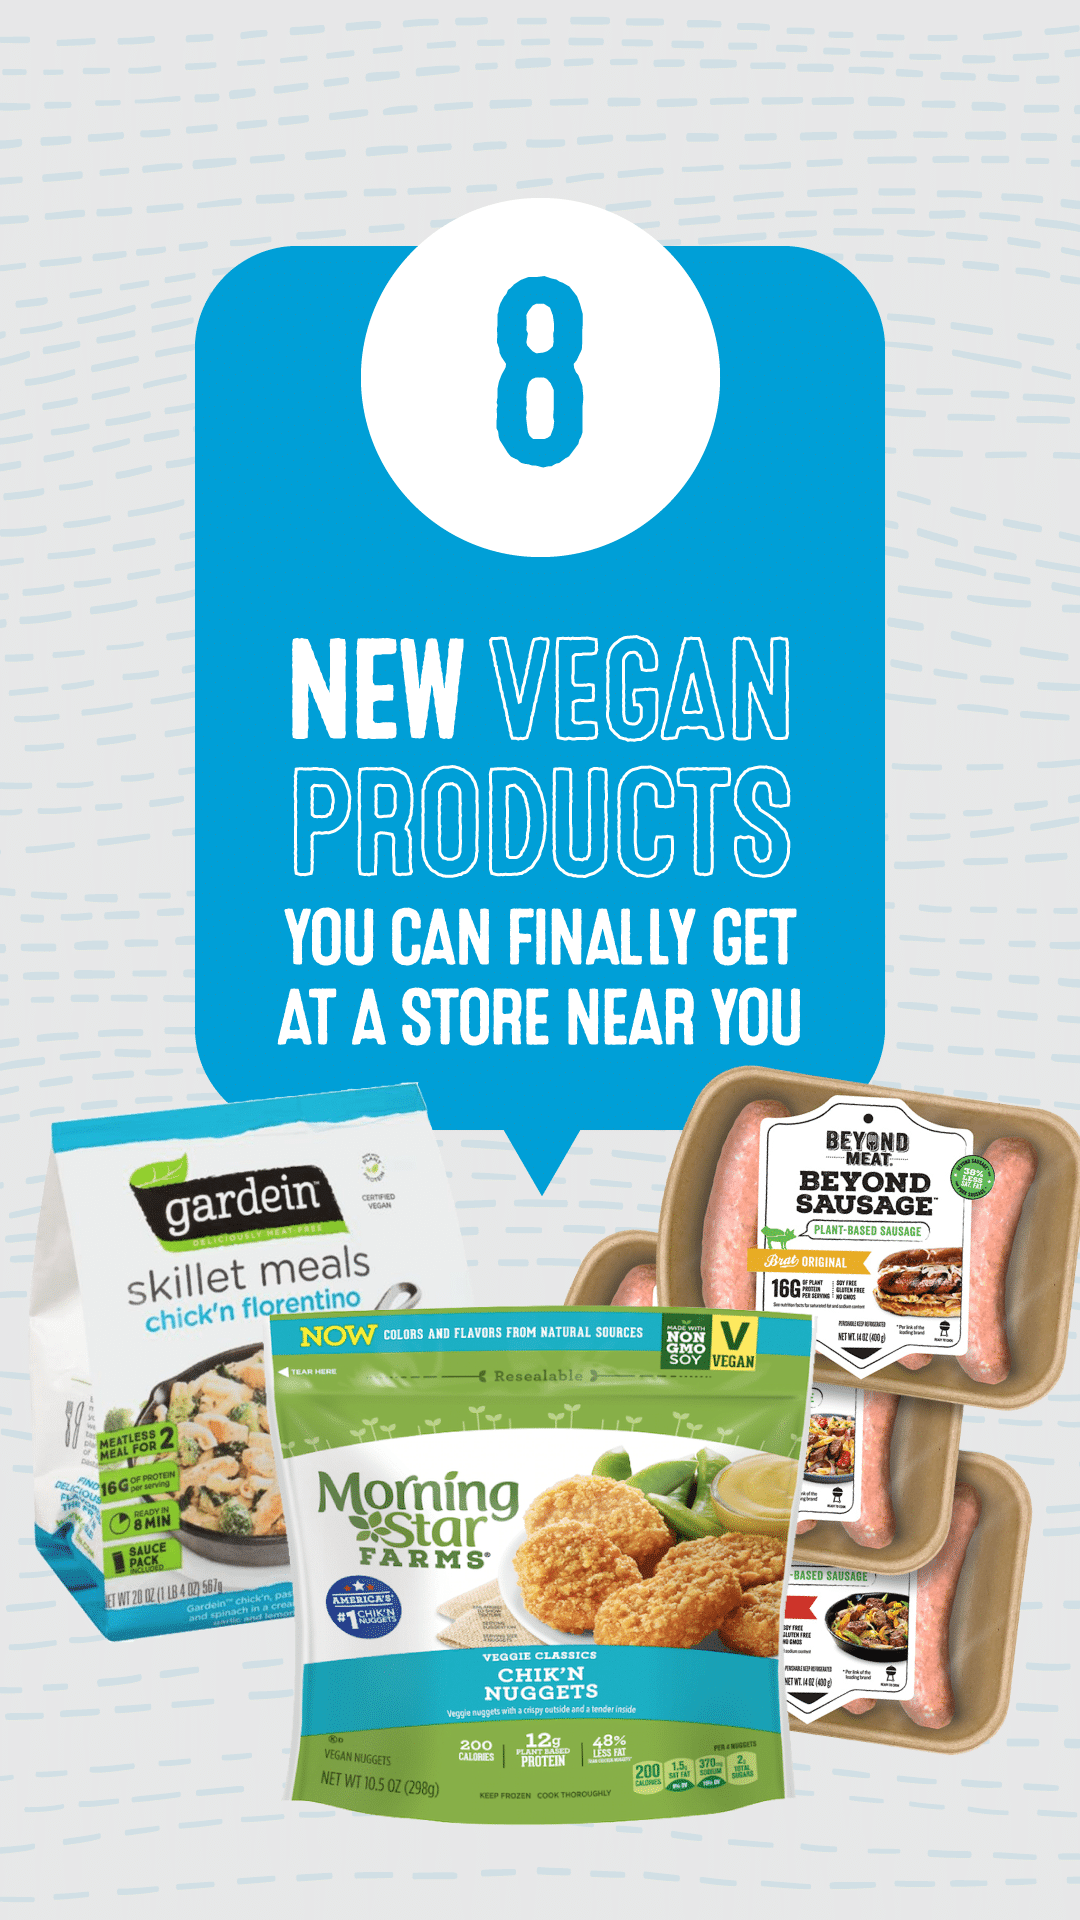 8 New Vegan Products You Can Finally Get at a Store Near You ChooseVeg